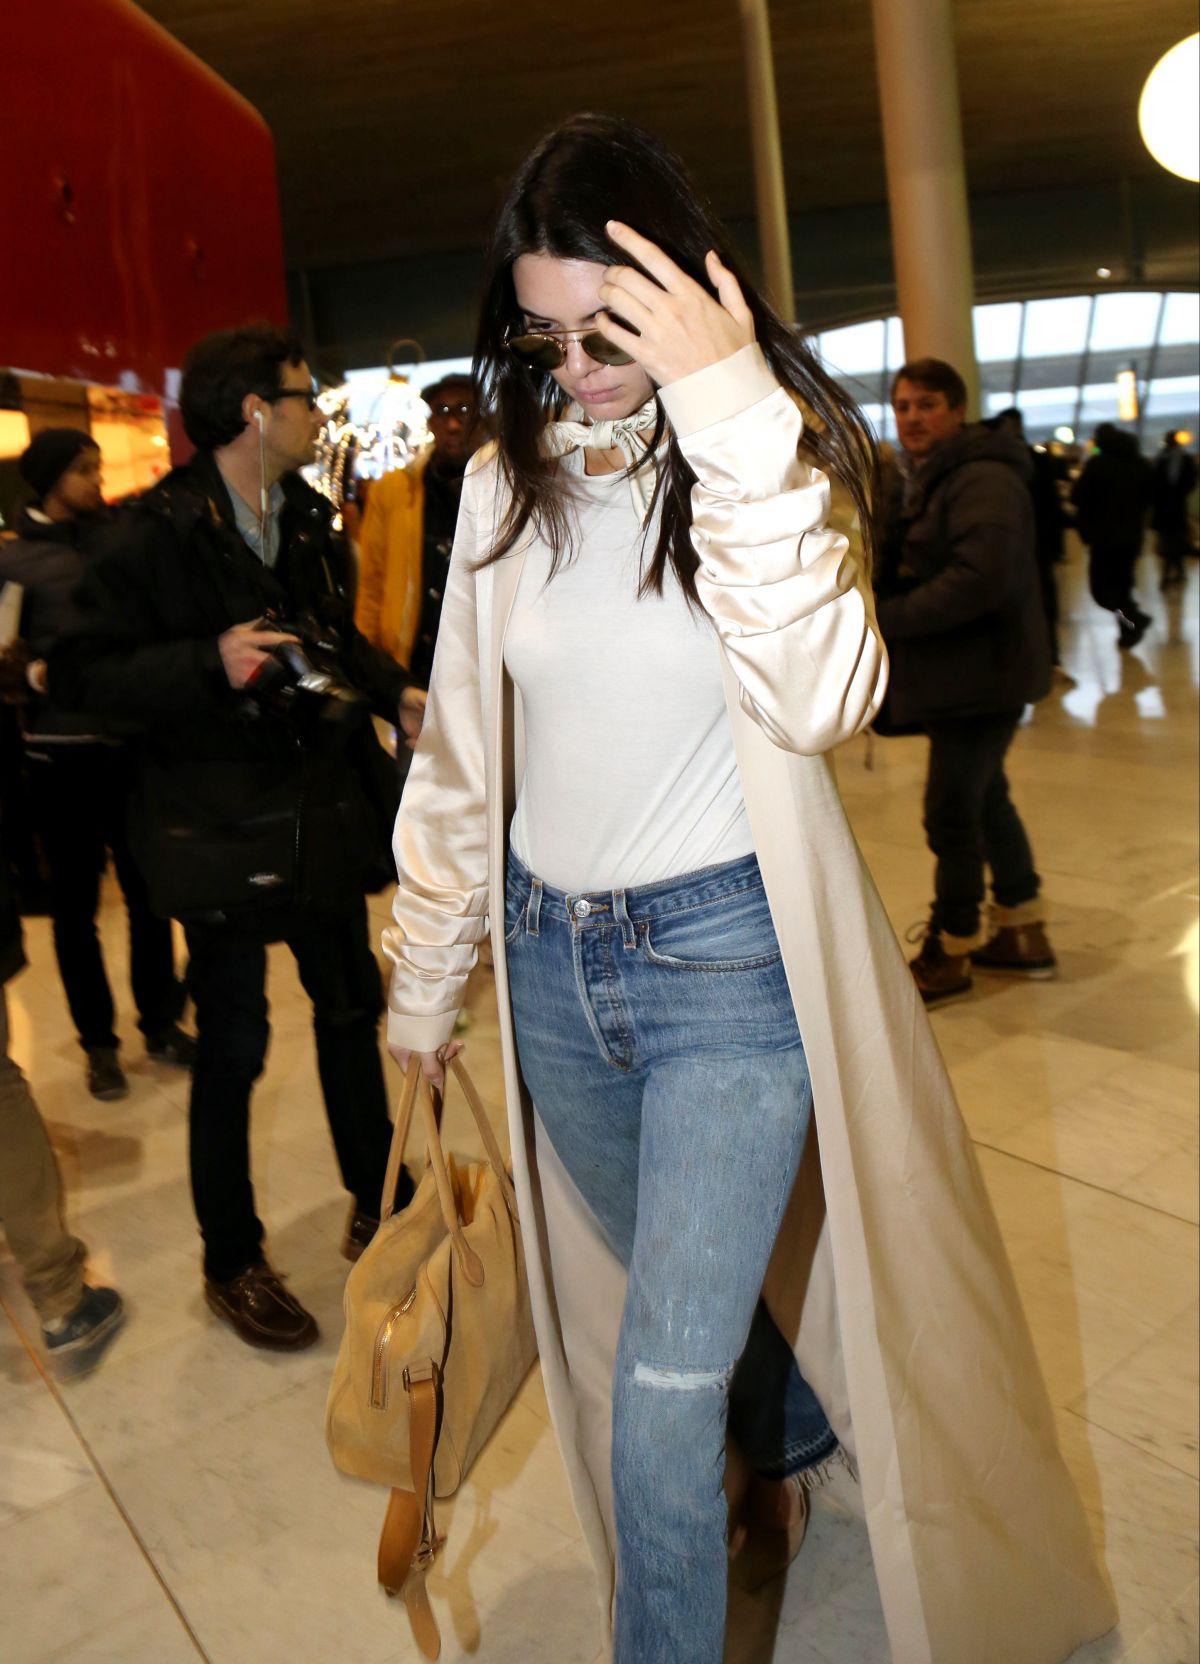 KENDALL JENNER Arrives at Charles De Gaulle Airport in Paris 01/23/2016